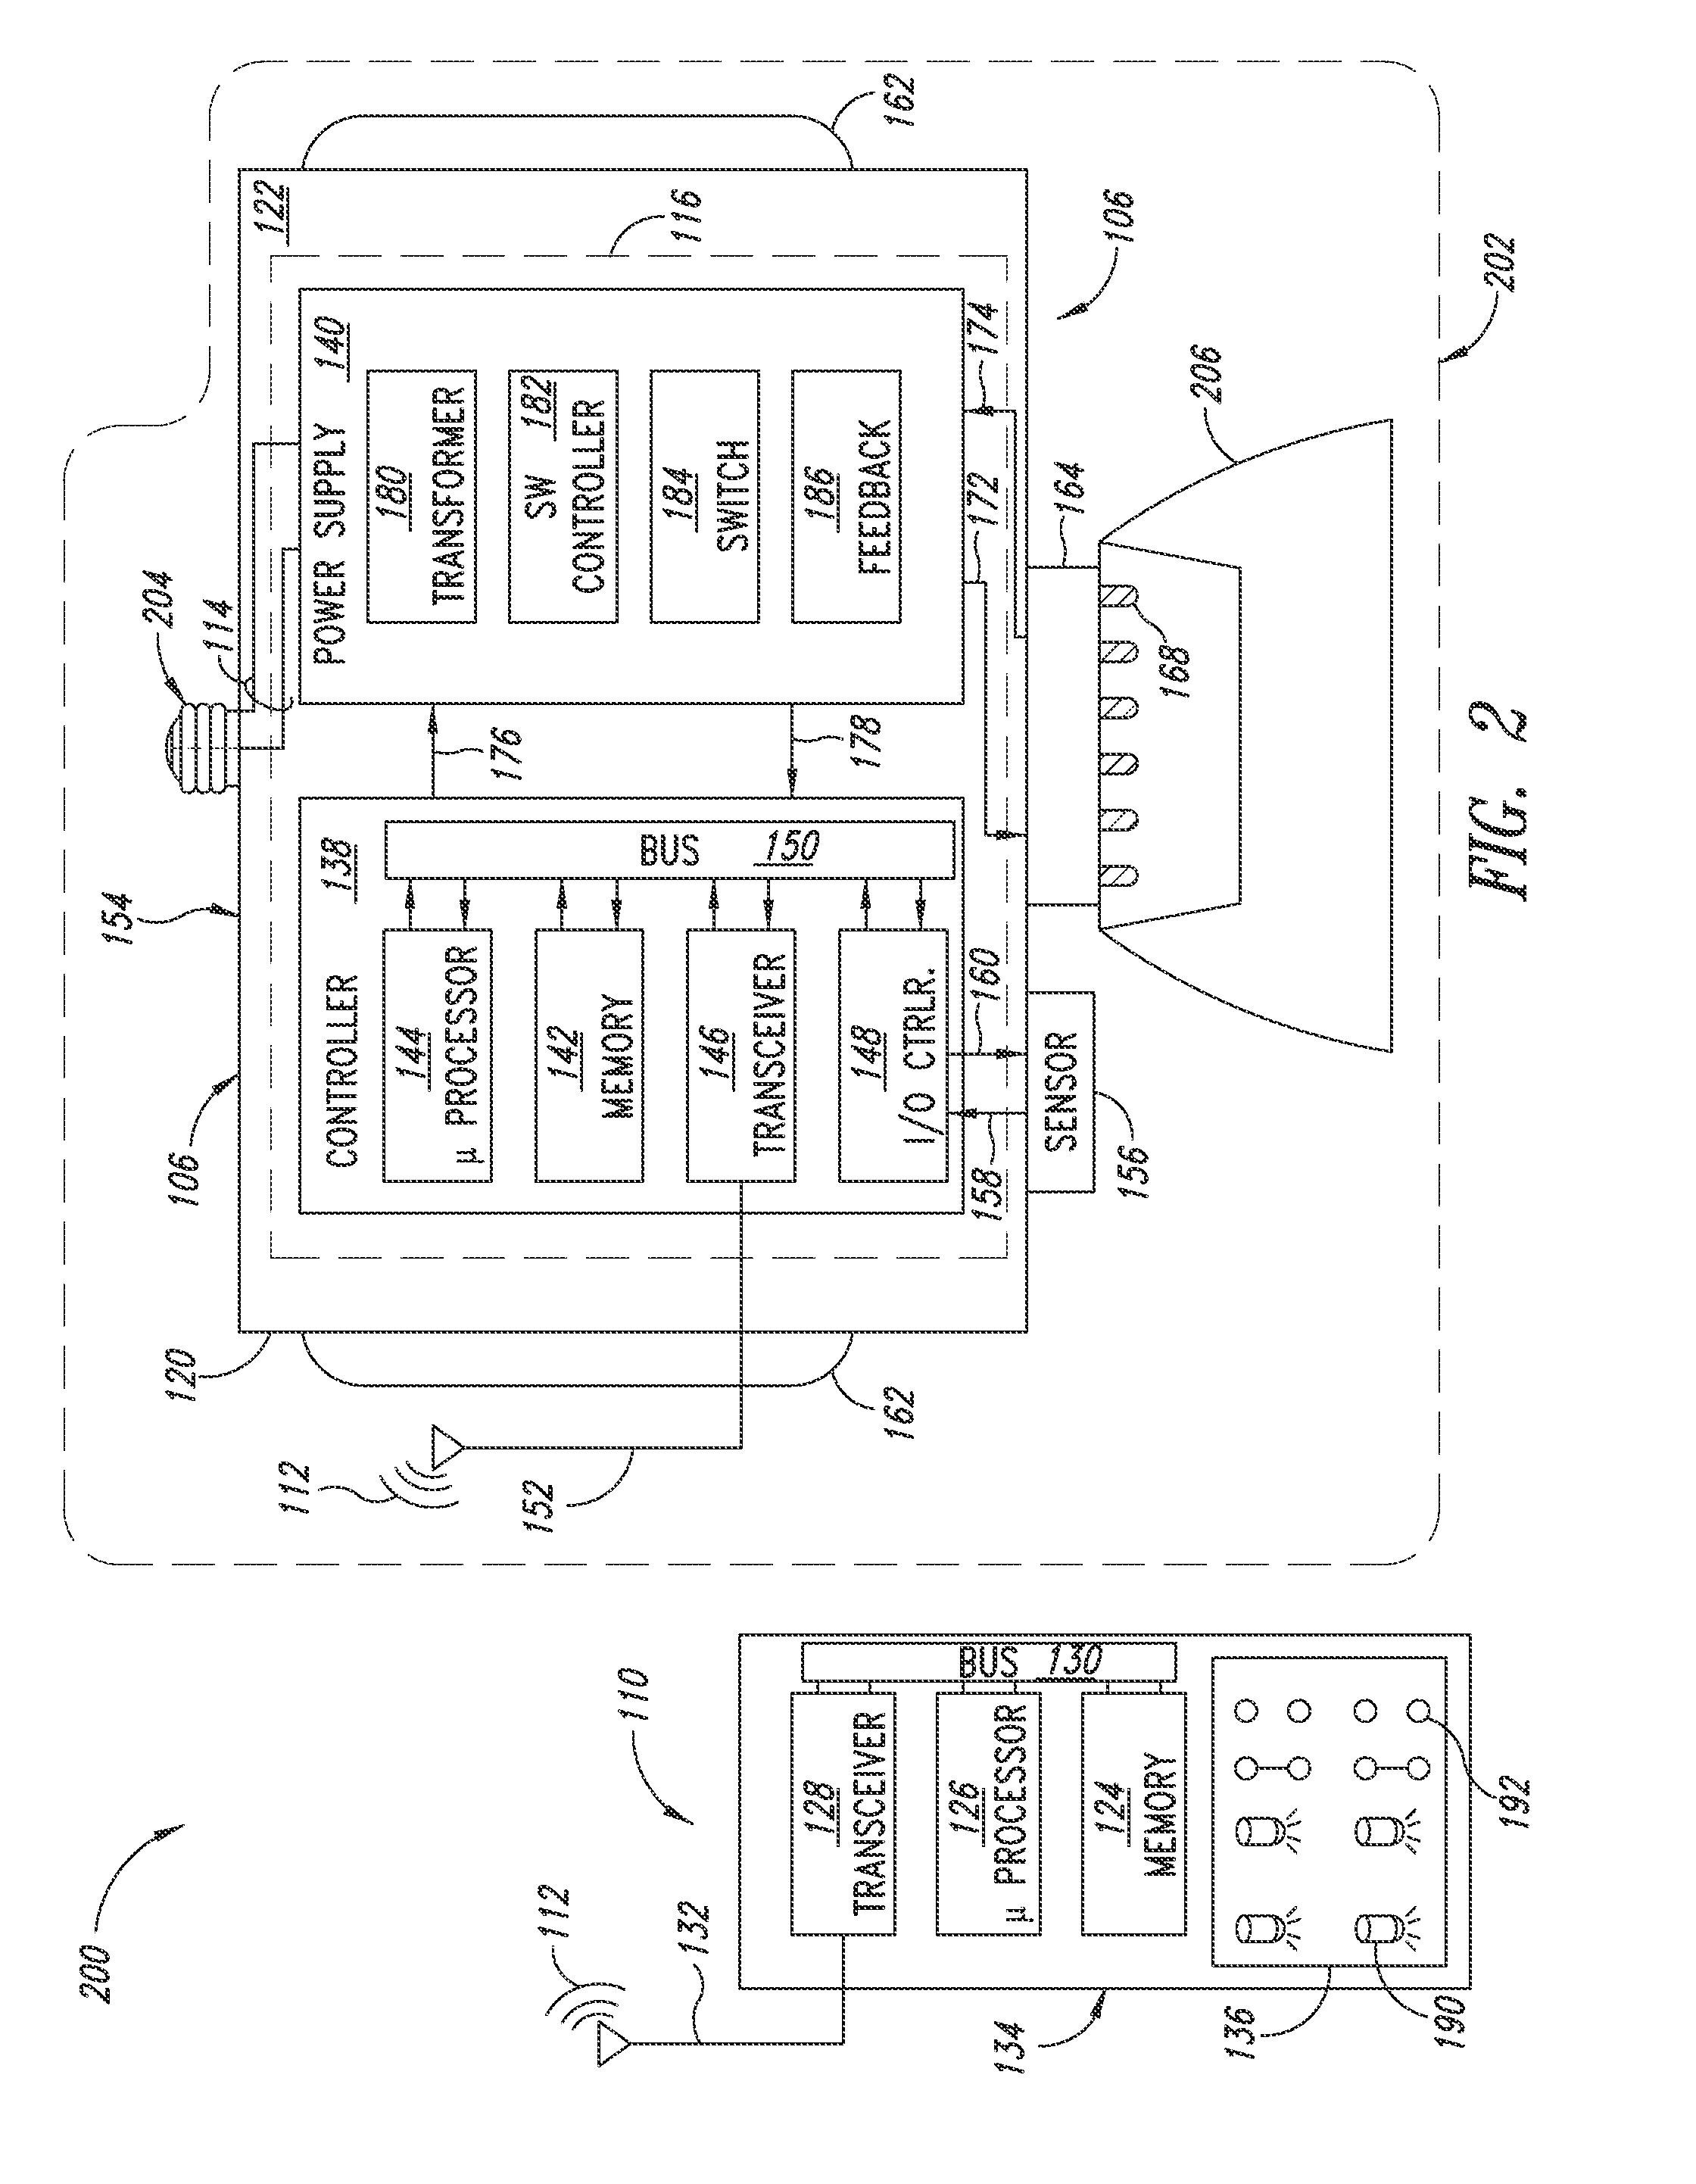 Remotely adjustable solid-state lamp